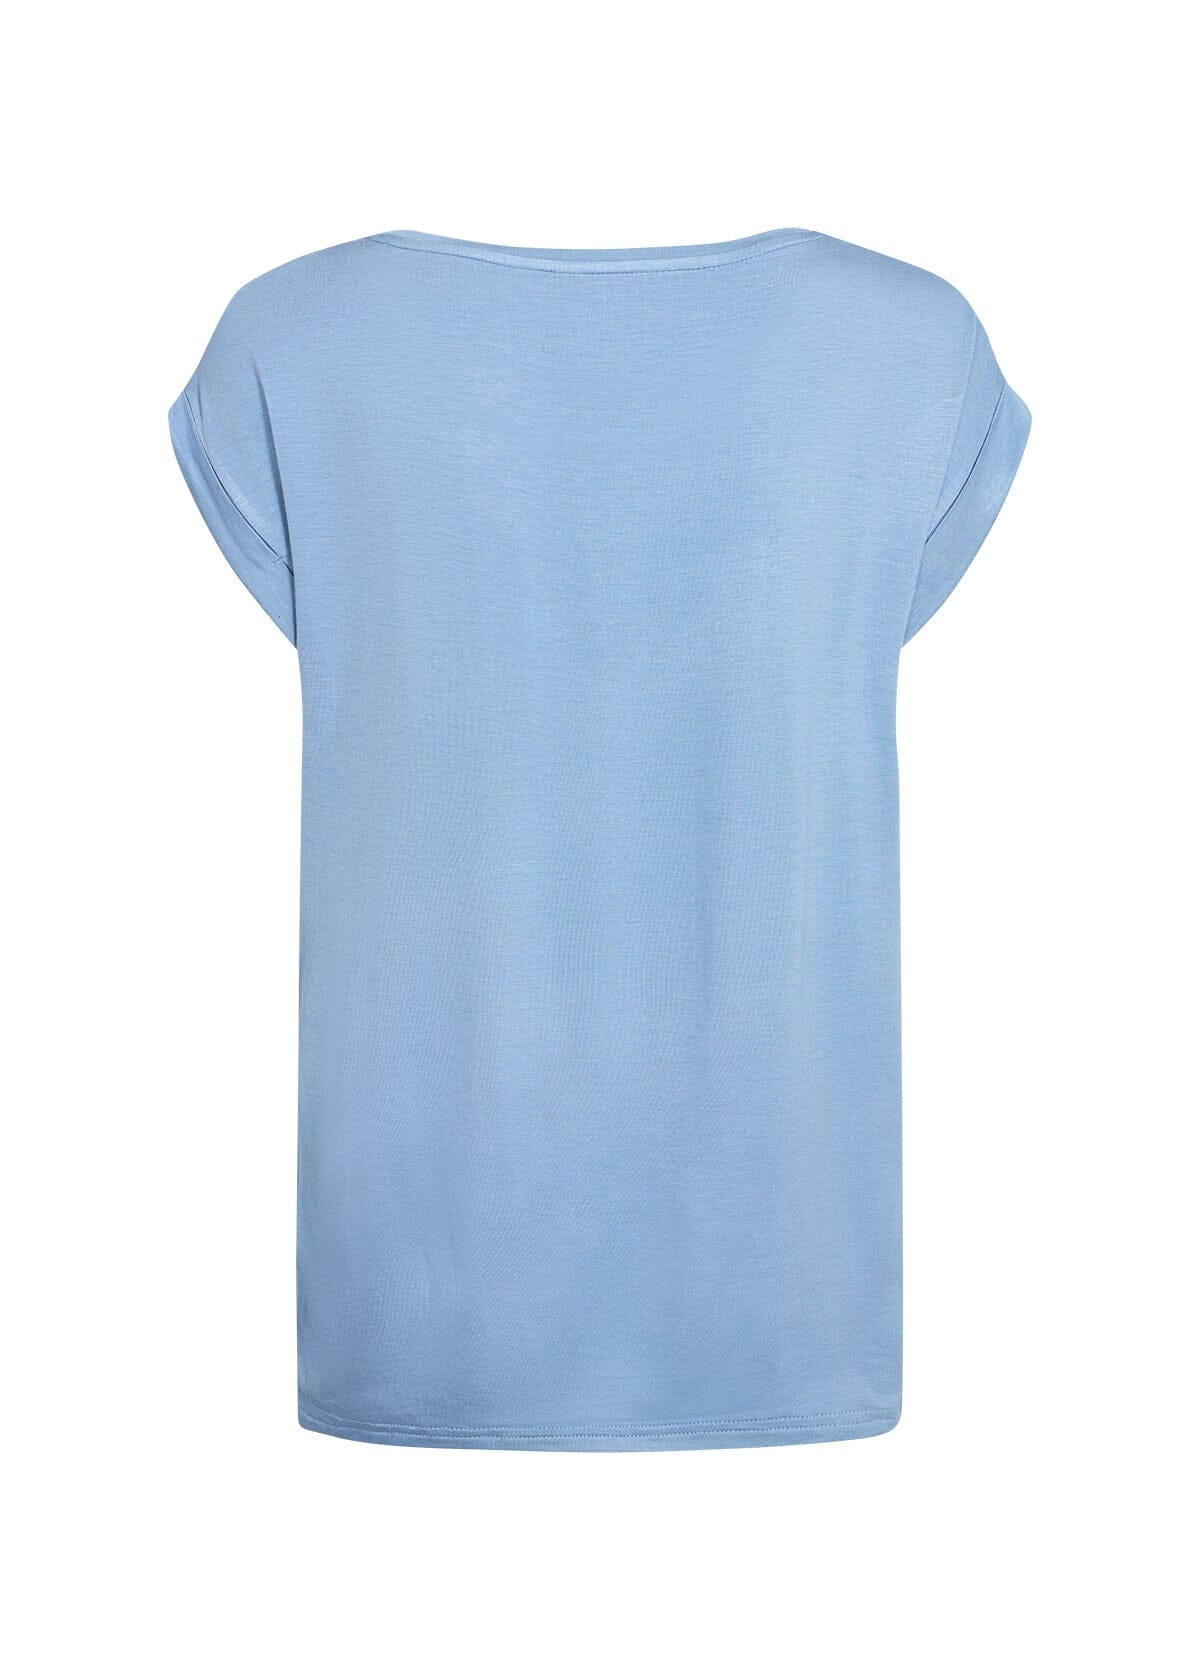 Thilde T-Shirt in Crystal Blue T-Shirt Soyaconcept 